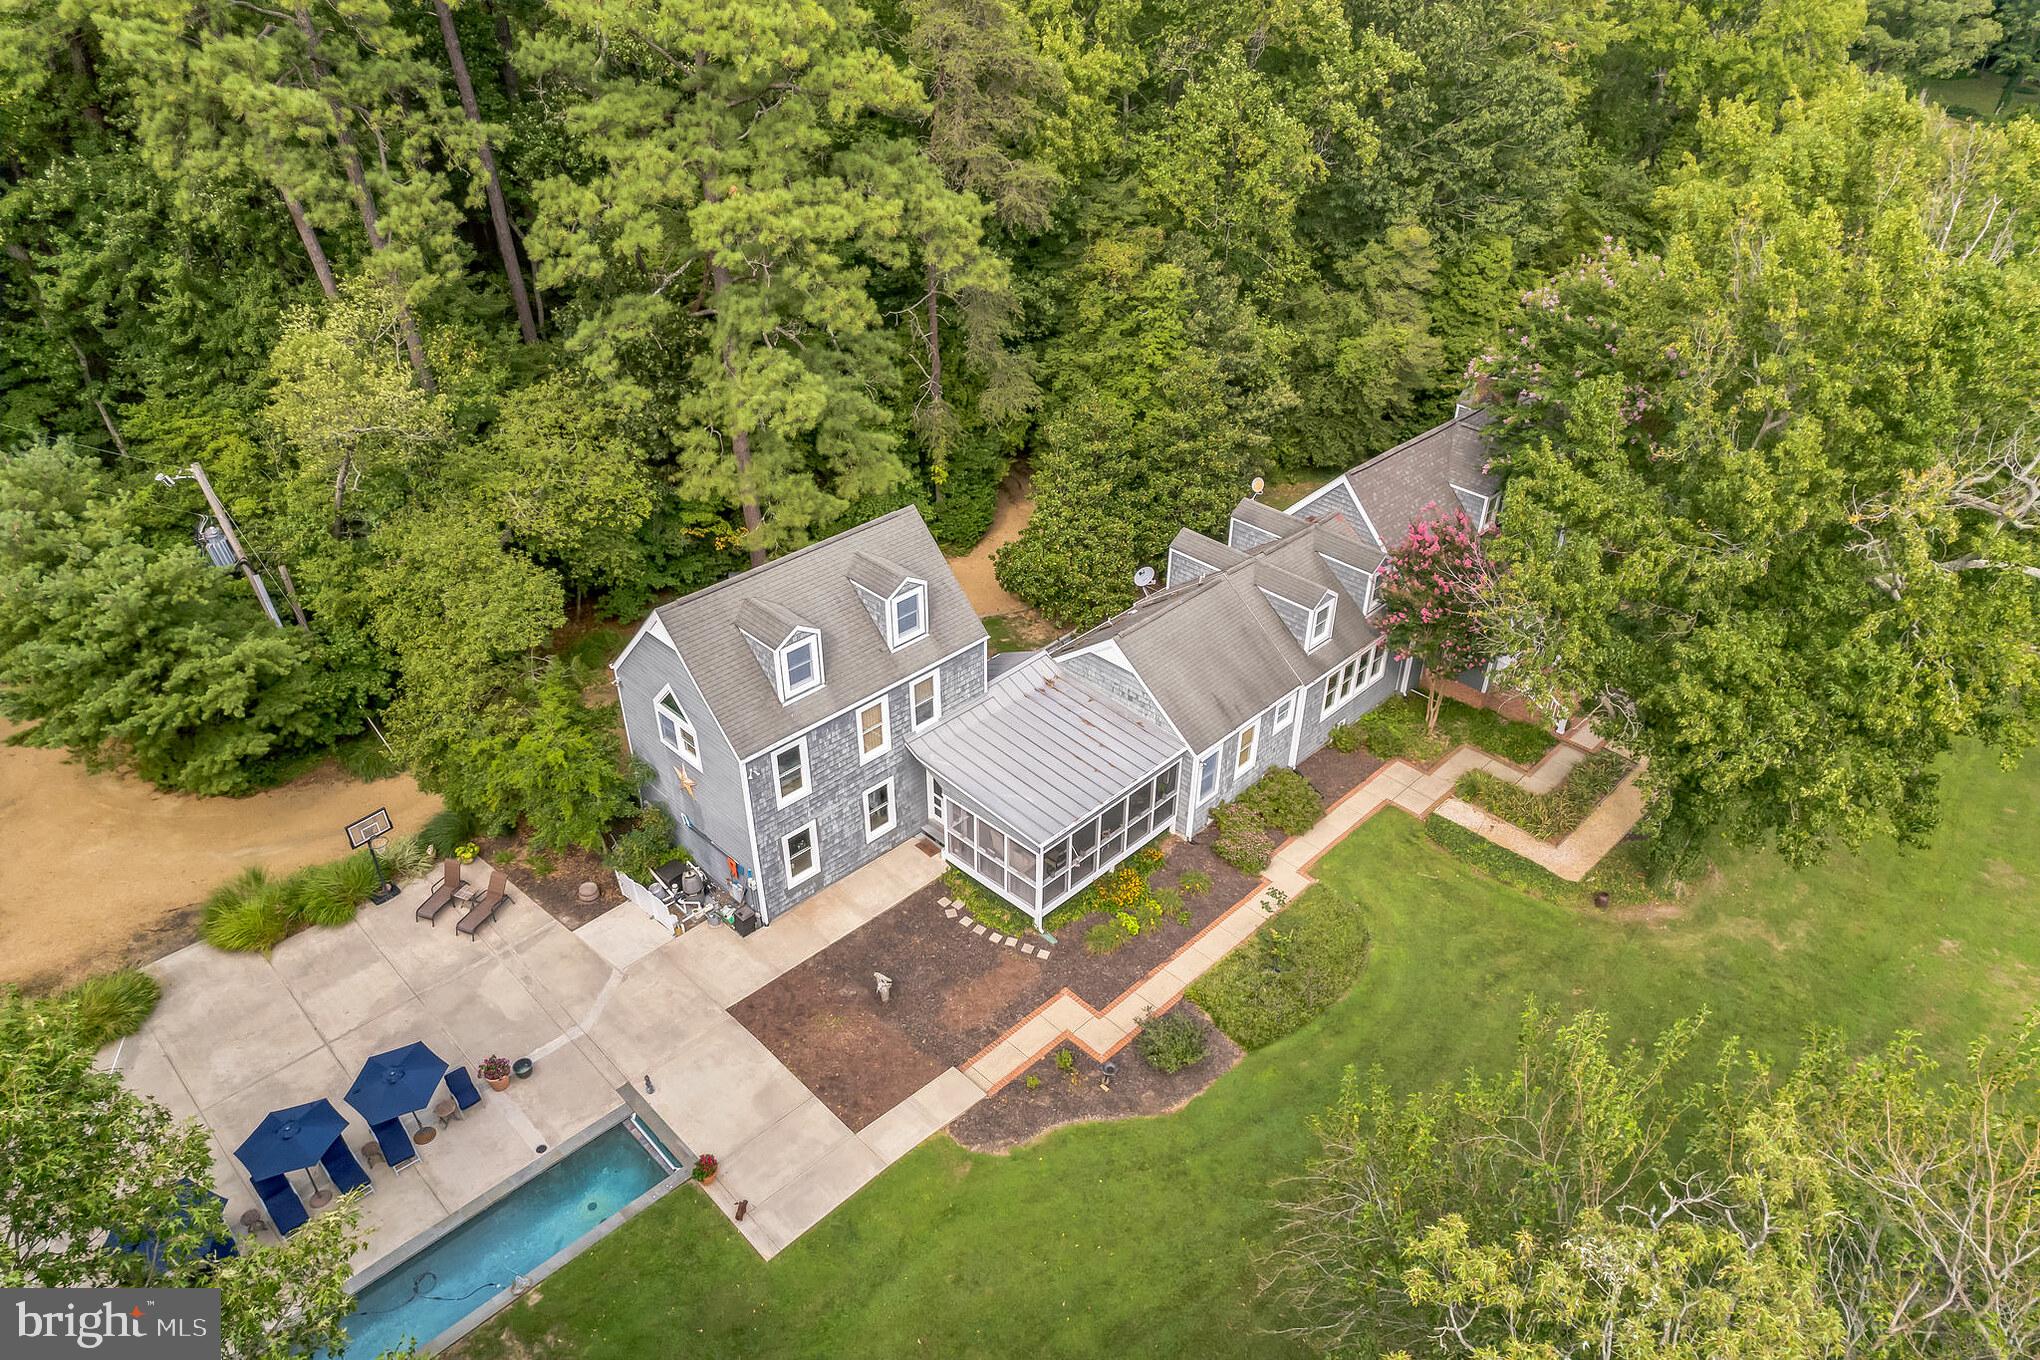 Positioned on Horseshoe Bend of the St. Mary’s River, near St. Mary’s City, you’ll find Cardinal Pines, a beautiful waterfront estate. The location provides views of waters of the bend, which are perfect for boating, kayaking, canoeing, or swimming, while taking in the area’s beauty from sunrise to sunset. This private estate provides a peaceful escape, but also serves as a wonderful impetus for area exploration. Within a quick boat trip are summer getaway hotspots throughout the St. Mary’s River or out the mouth into the Potomac River to the shores of Virginia.  Many points of interest for food, drinks, and live music, or of course the various bodies of water for boating and fishing. Amongst a long list of features making this a unique, truly once-in-a-generation opportunity is the property, residence, and deep-water dock. The wide vista is of the St. Mary’s College of Maryland’s campus, Church Point at Historic St. Mary’s City, and across to Pagan Point and Horseshoe Point.  This 6-acre parcel allows for a seamless launching point to board your power or sailboat in waiting and cruise out for a day or overnight.  The property boasts over 530 ft +/- of shoreline while the home rests approximately 15 ft +/- above the water line. The grounds of this estate consist of mature tree growth, professional landscaping, pier with boat lift and a slip for a sailboat, as well as a swimming pool with tanning ledge and a lap lane.  Cardinal Pines hosts a main residence attached to a two-car garage with a pied-à-terre above and connected by a screened porch.  The Nantucket-style home welcomes you through the front door into a vaulted living room.  The ceiling accentuates the brick, wood-burning fireplace and stunning wood beams. Windows brings water views in as well as light from above.  The dining room is just off the kitchen and allows for great gatherings.  The loft above the dining room may be used as a 5th bedroom or a fitness room. Off the great room is the primary suite, which consists of an entry hallway, two full bathrooms, yes two! along with two closets (his and hers!). Above the hallway is a bedroom with an attached bathroom.  The other end of the home features a second bedroom on the main level with an attached full bathroom.  The kitchen boasts modern amenities such as a microwave/wall oven, induction cooktop, and dishwasher while storing items in a walk-in pantry. The unfinished basement once housed an apartment for caretakers with 11 ft ceilings and a plumbed area for a bathroom.  The basement under the primary suite is used as a workshop and walks out to the beautiful yard.  The pied-a-terre hosts living room, currently being used as an office, 1 bedroom, a full bathroom, walk-in closet, and small kitchenette.  The property provides for multiple car parking and circles back around to exit this very private estate.